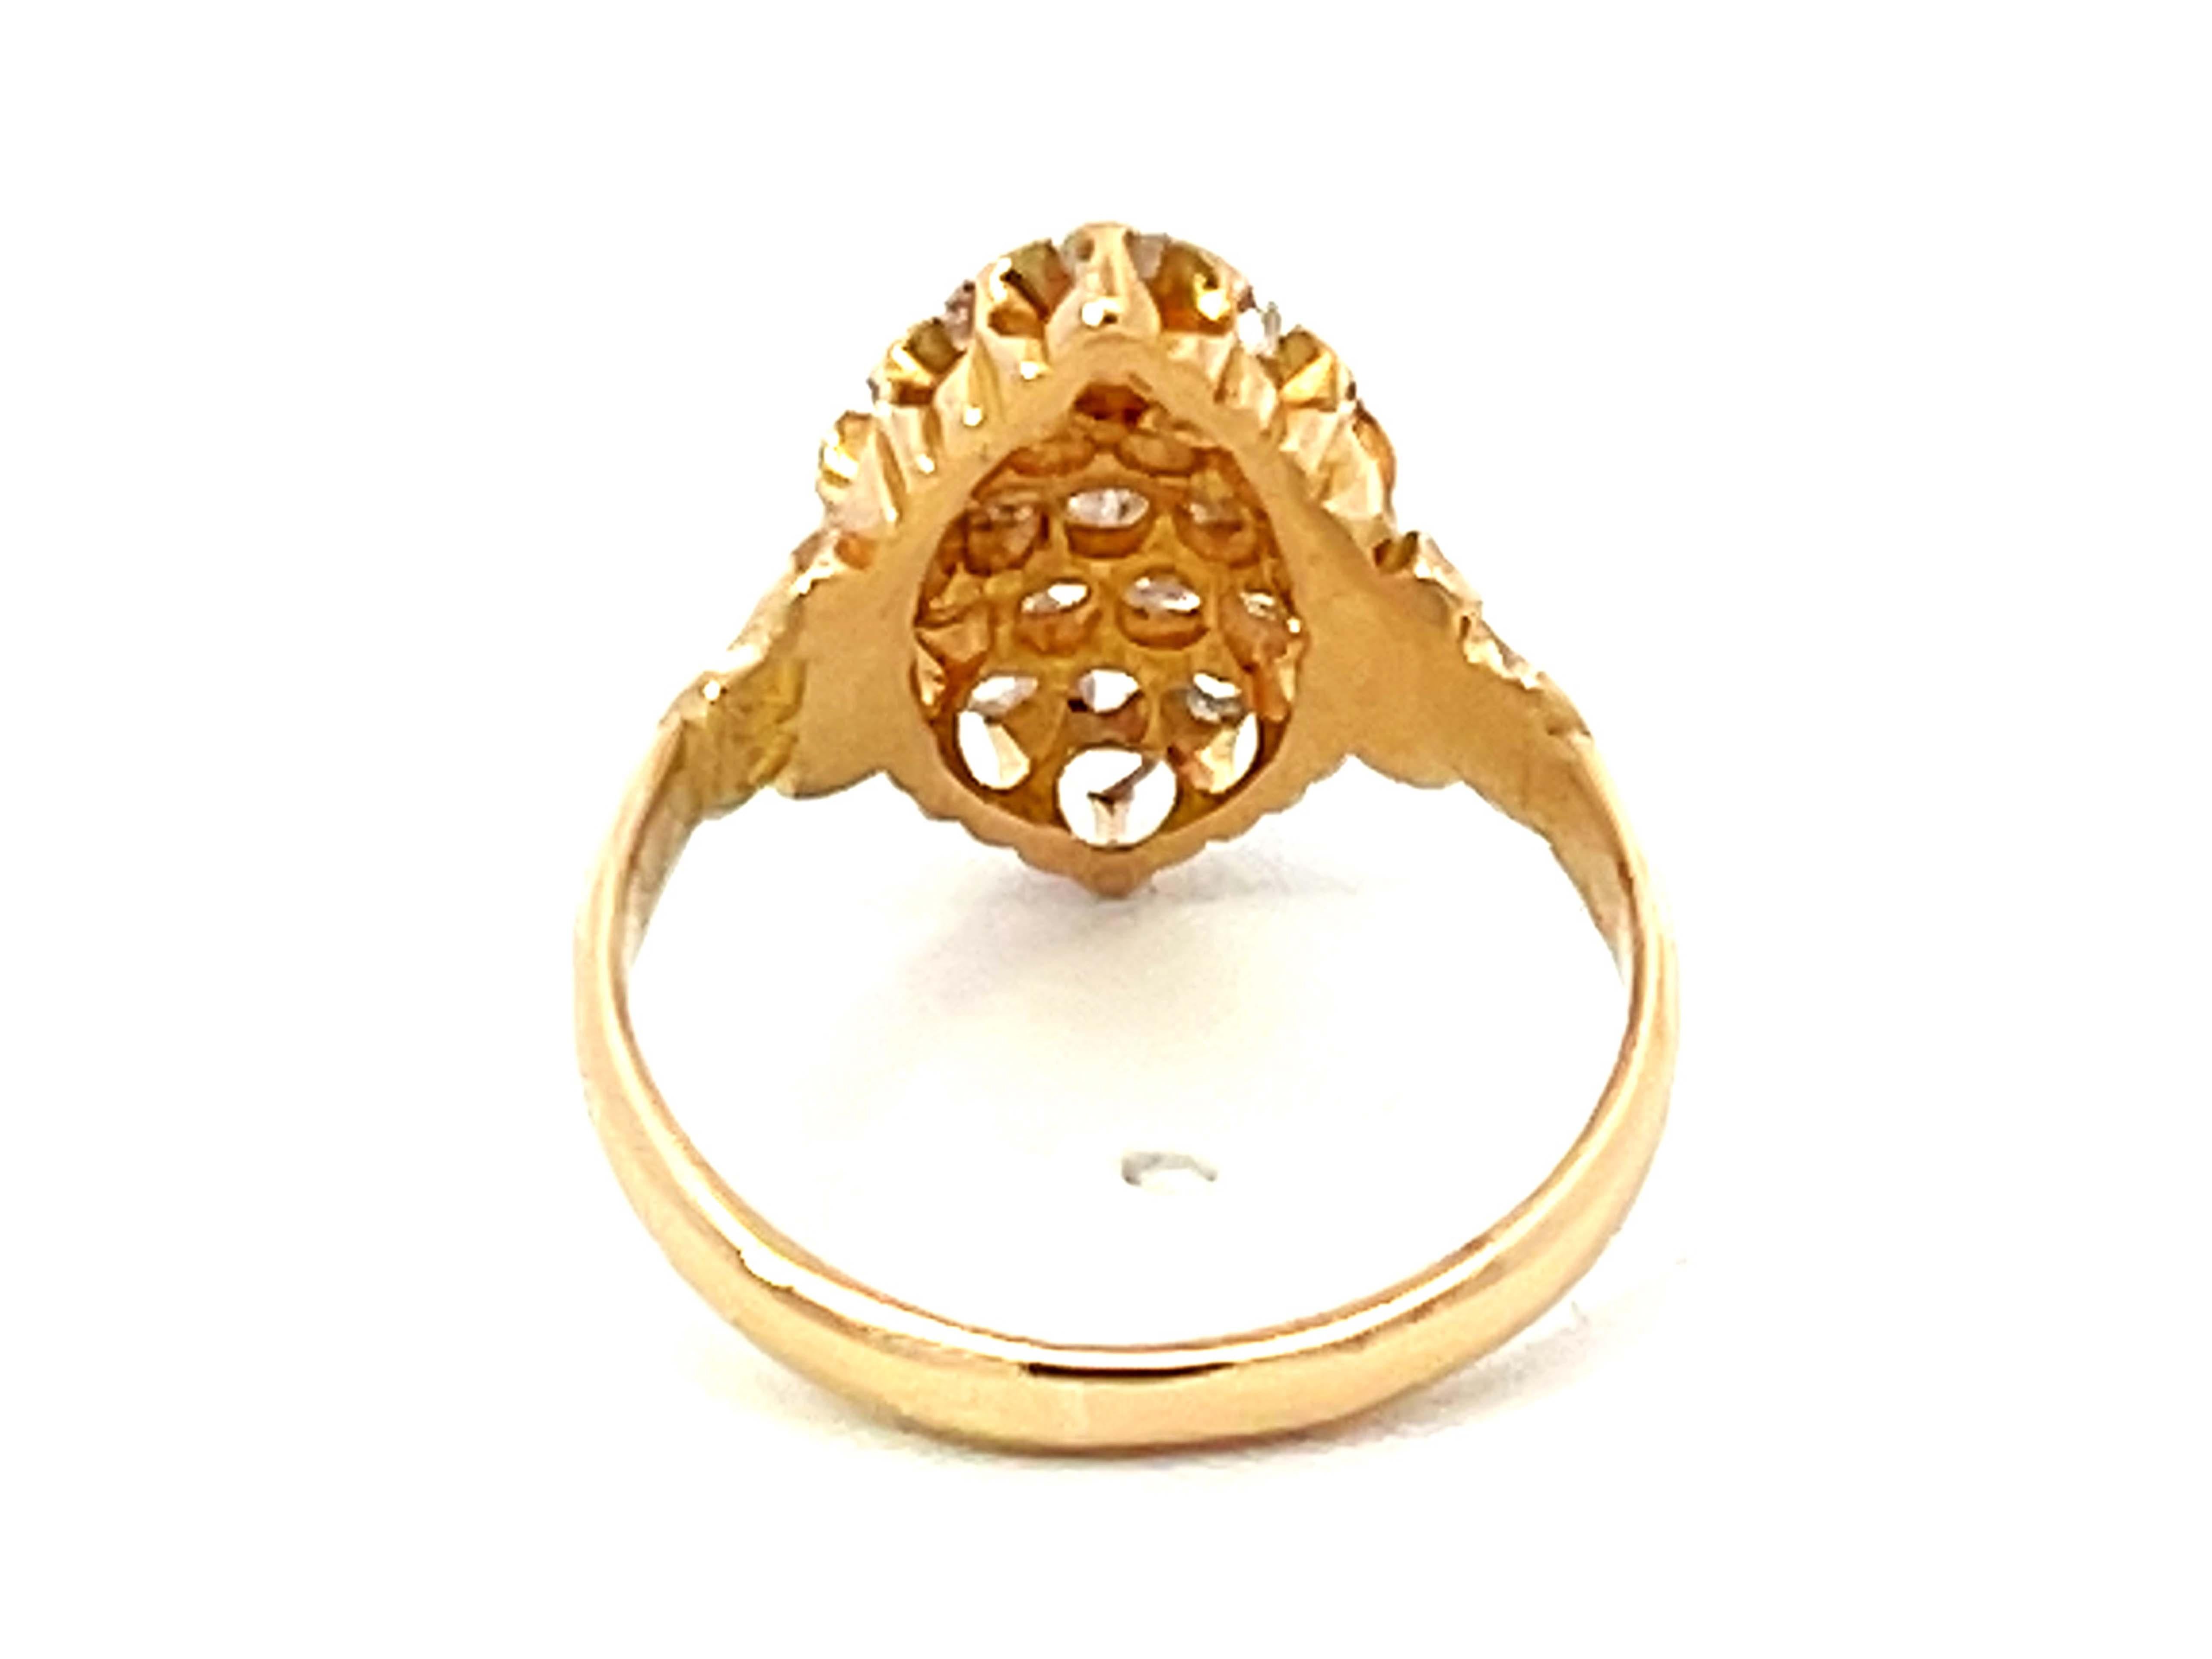 Antique European Rose Cut Diamond Ring in 18K Yellow Gold For Sale 2